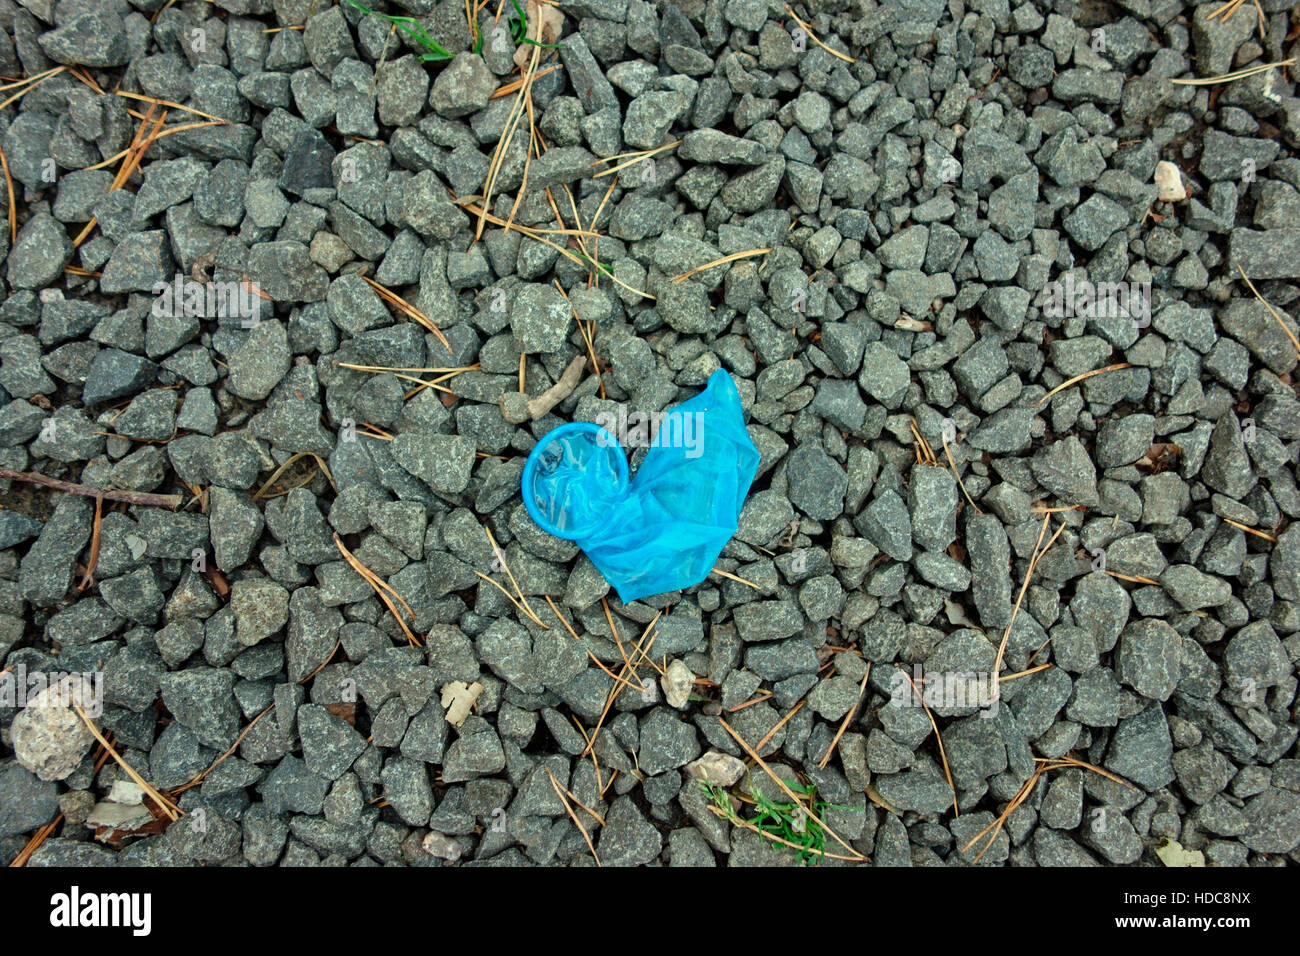 A used condom lying on the ground Stock Photo